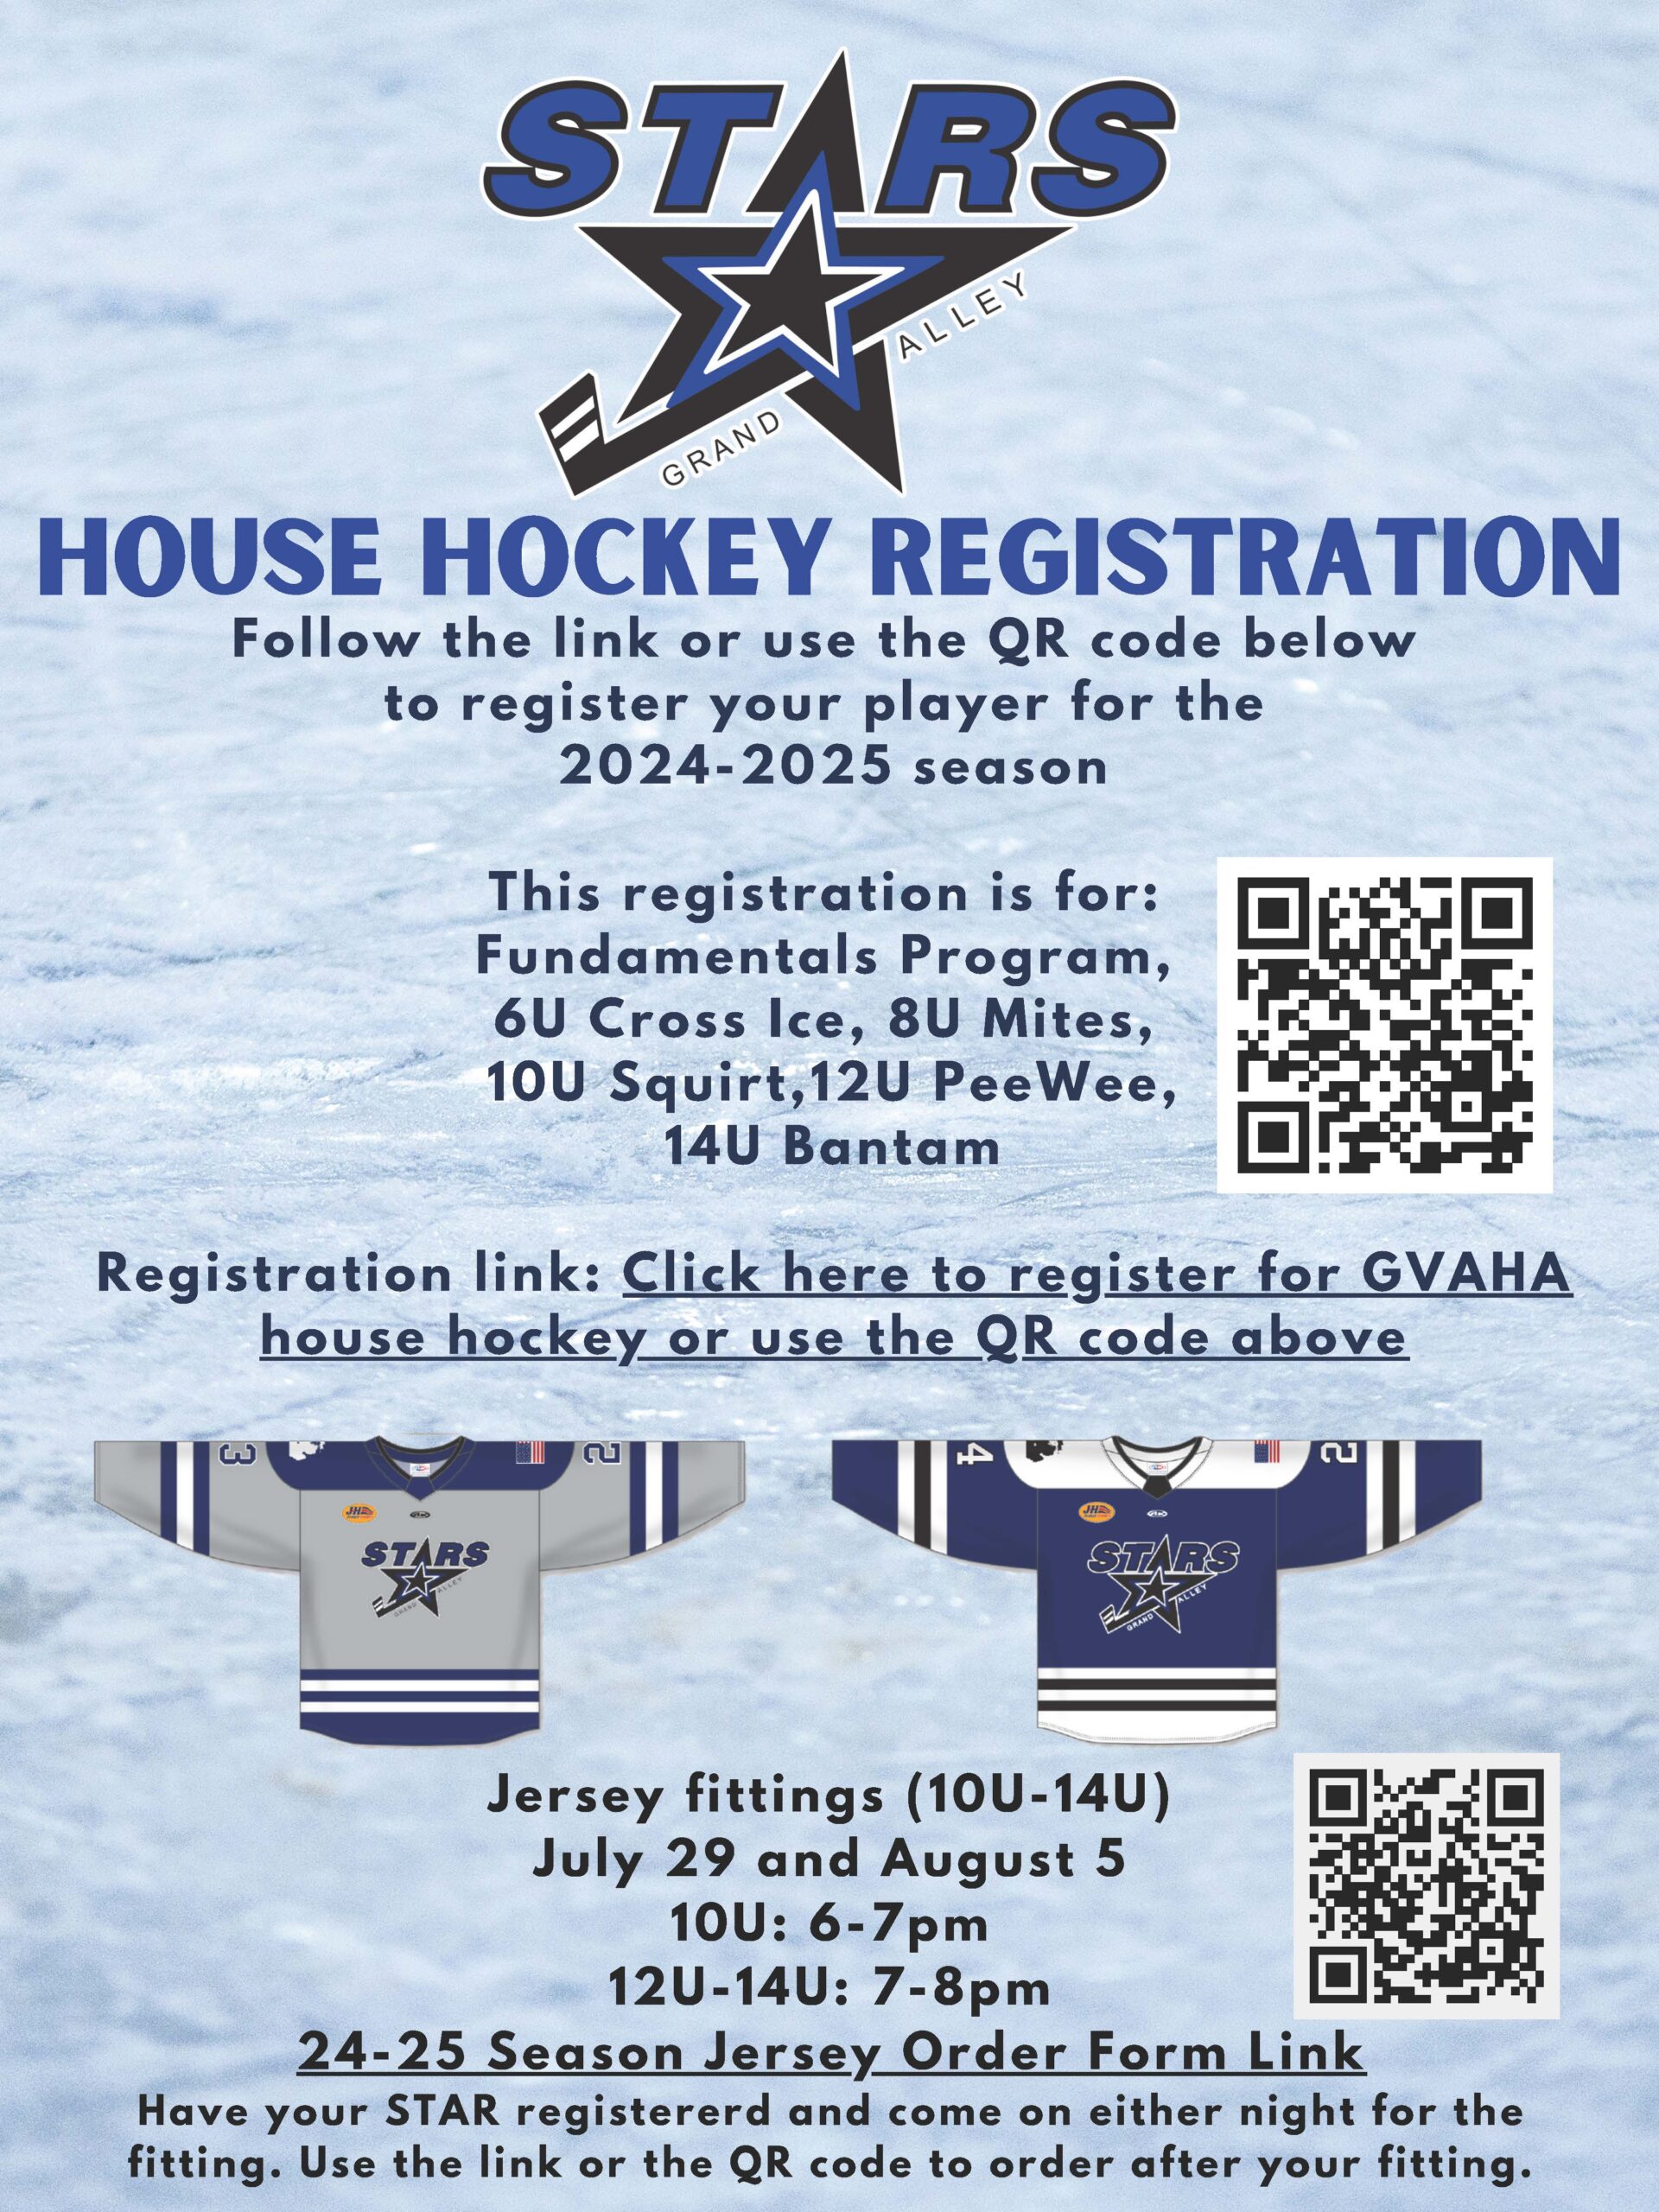 Grand Valley Stars House Hockey Registration and Jersey Fitting